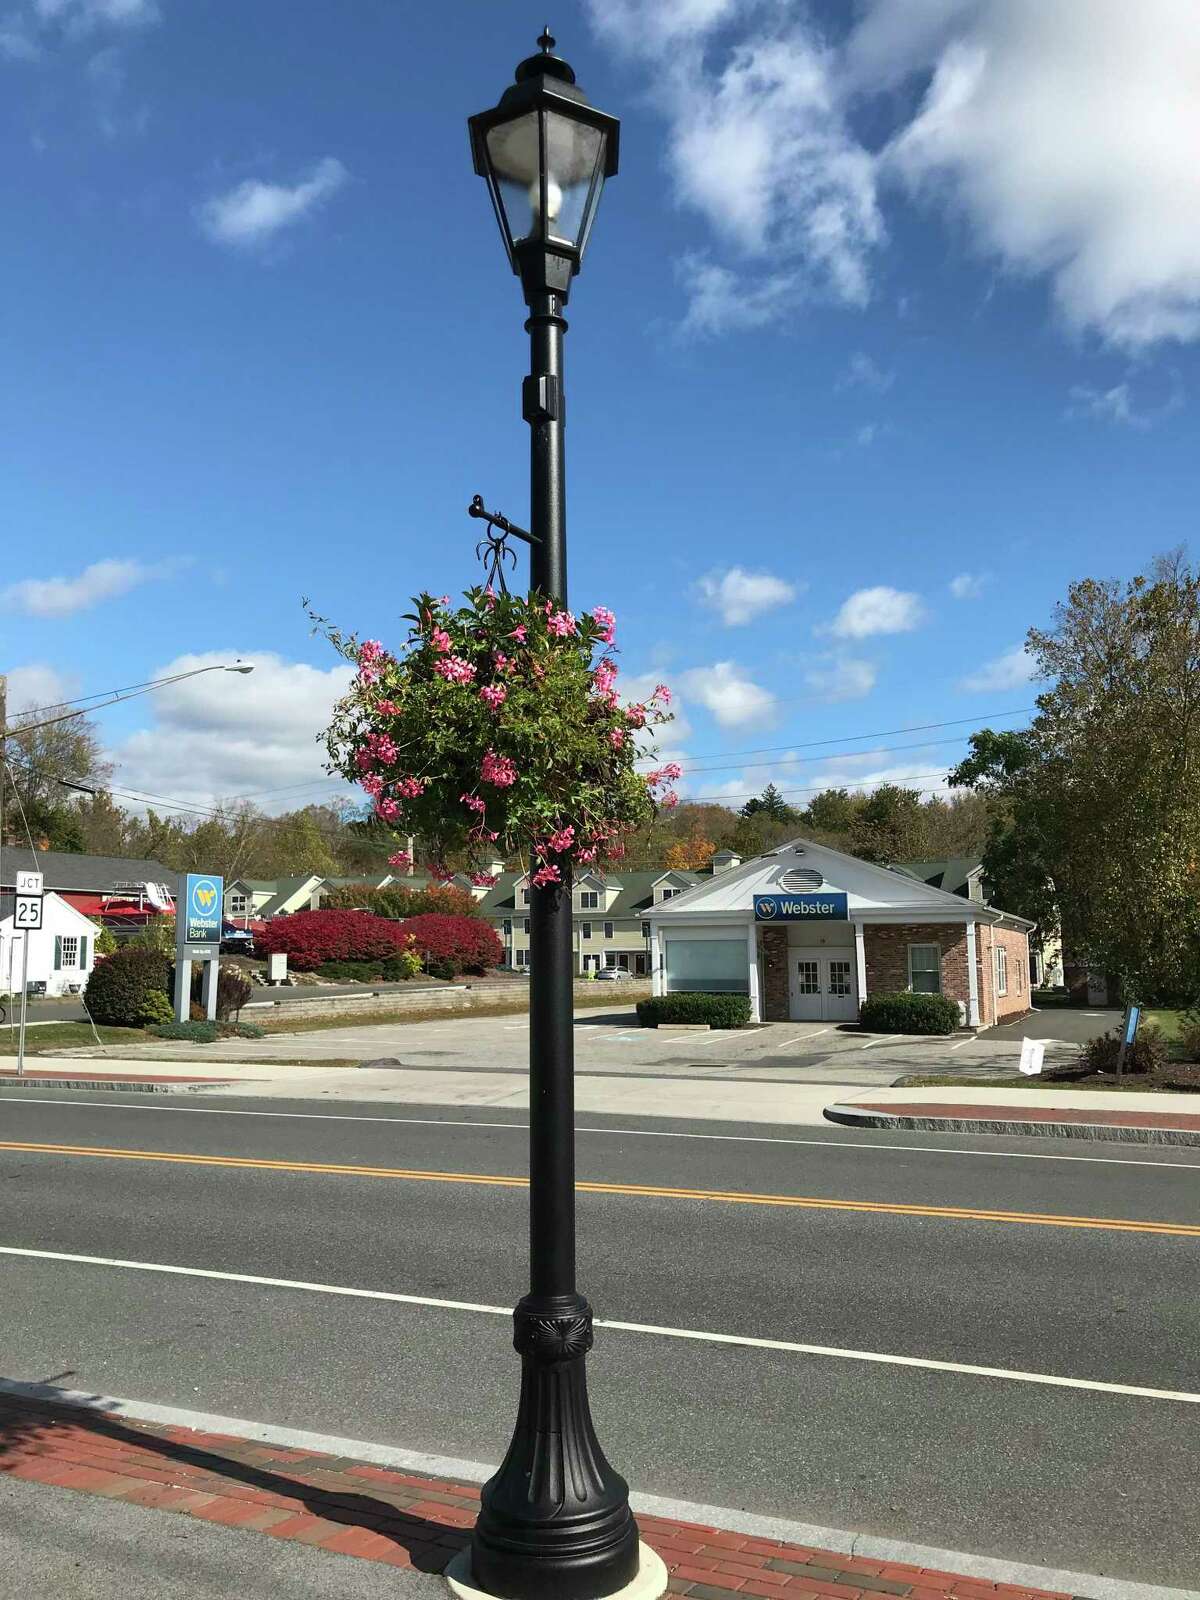 New sidewalk lights were installed as part of phase two of Brookfield's streetscape project. Photo Friday, Oct. 18, 2019.